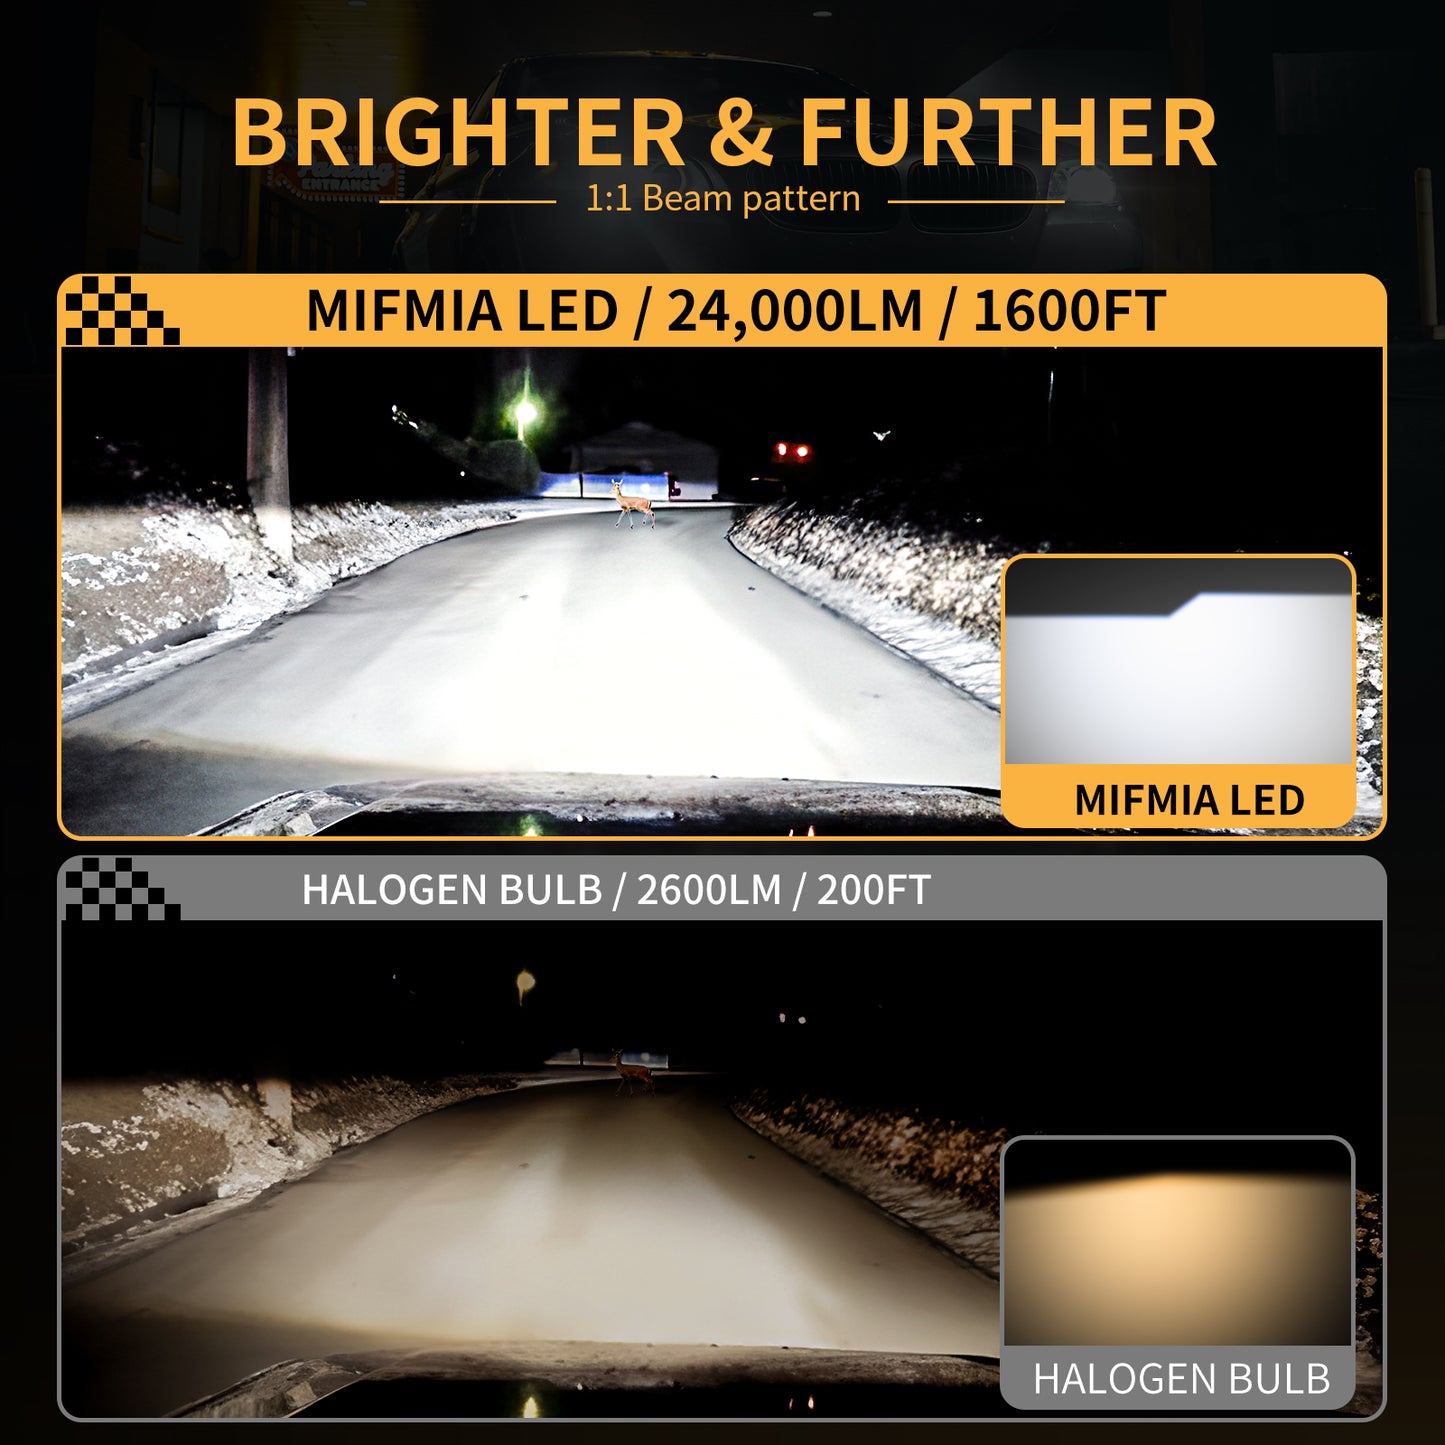 MIFMIA H4 LED Headlight Bulb, 20000 Lumens 600% Brighter 9003 Light Bulbs 6500K Cool White HB2 Hi/Lo Beam Halogen Replacement, Pack of 2